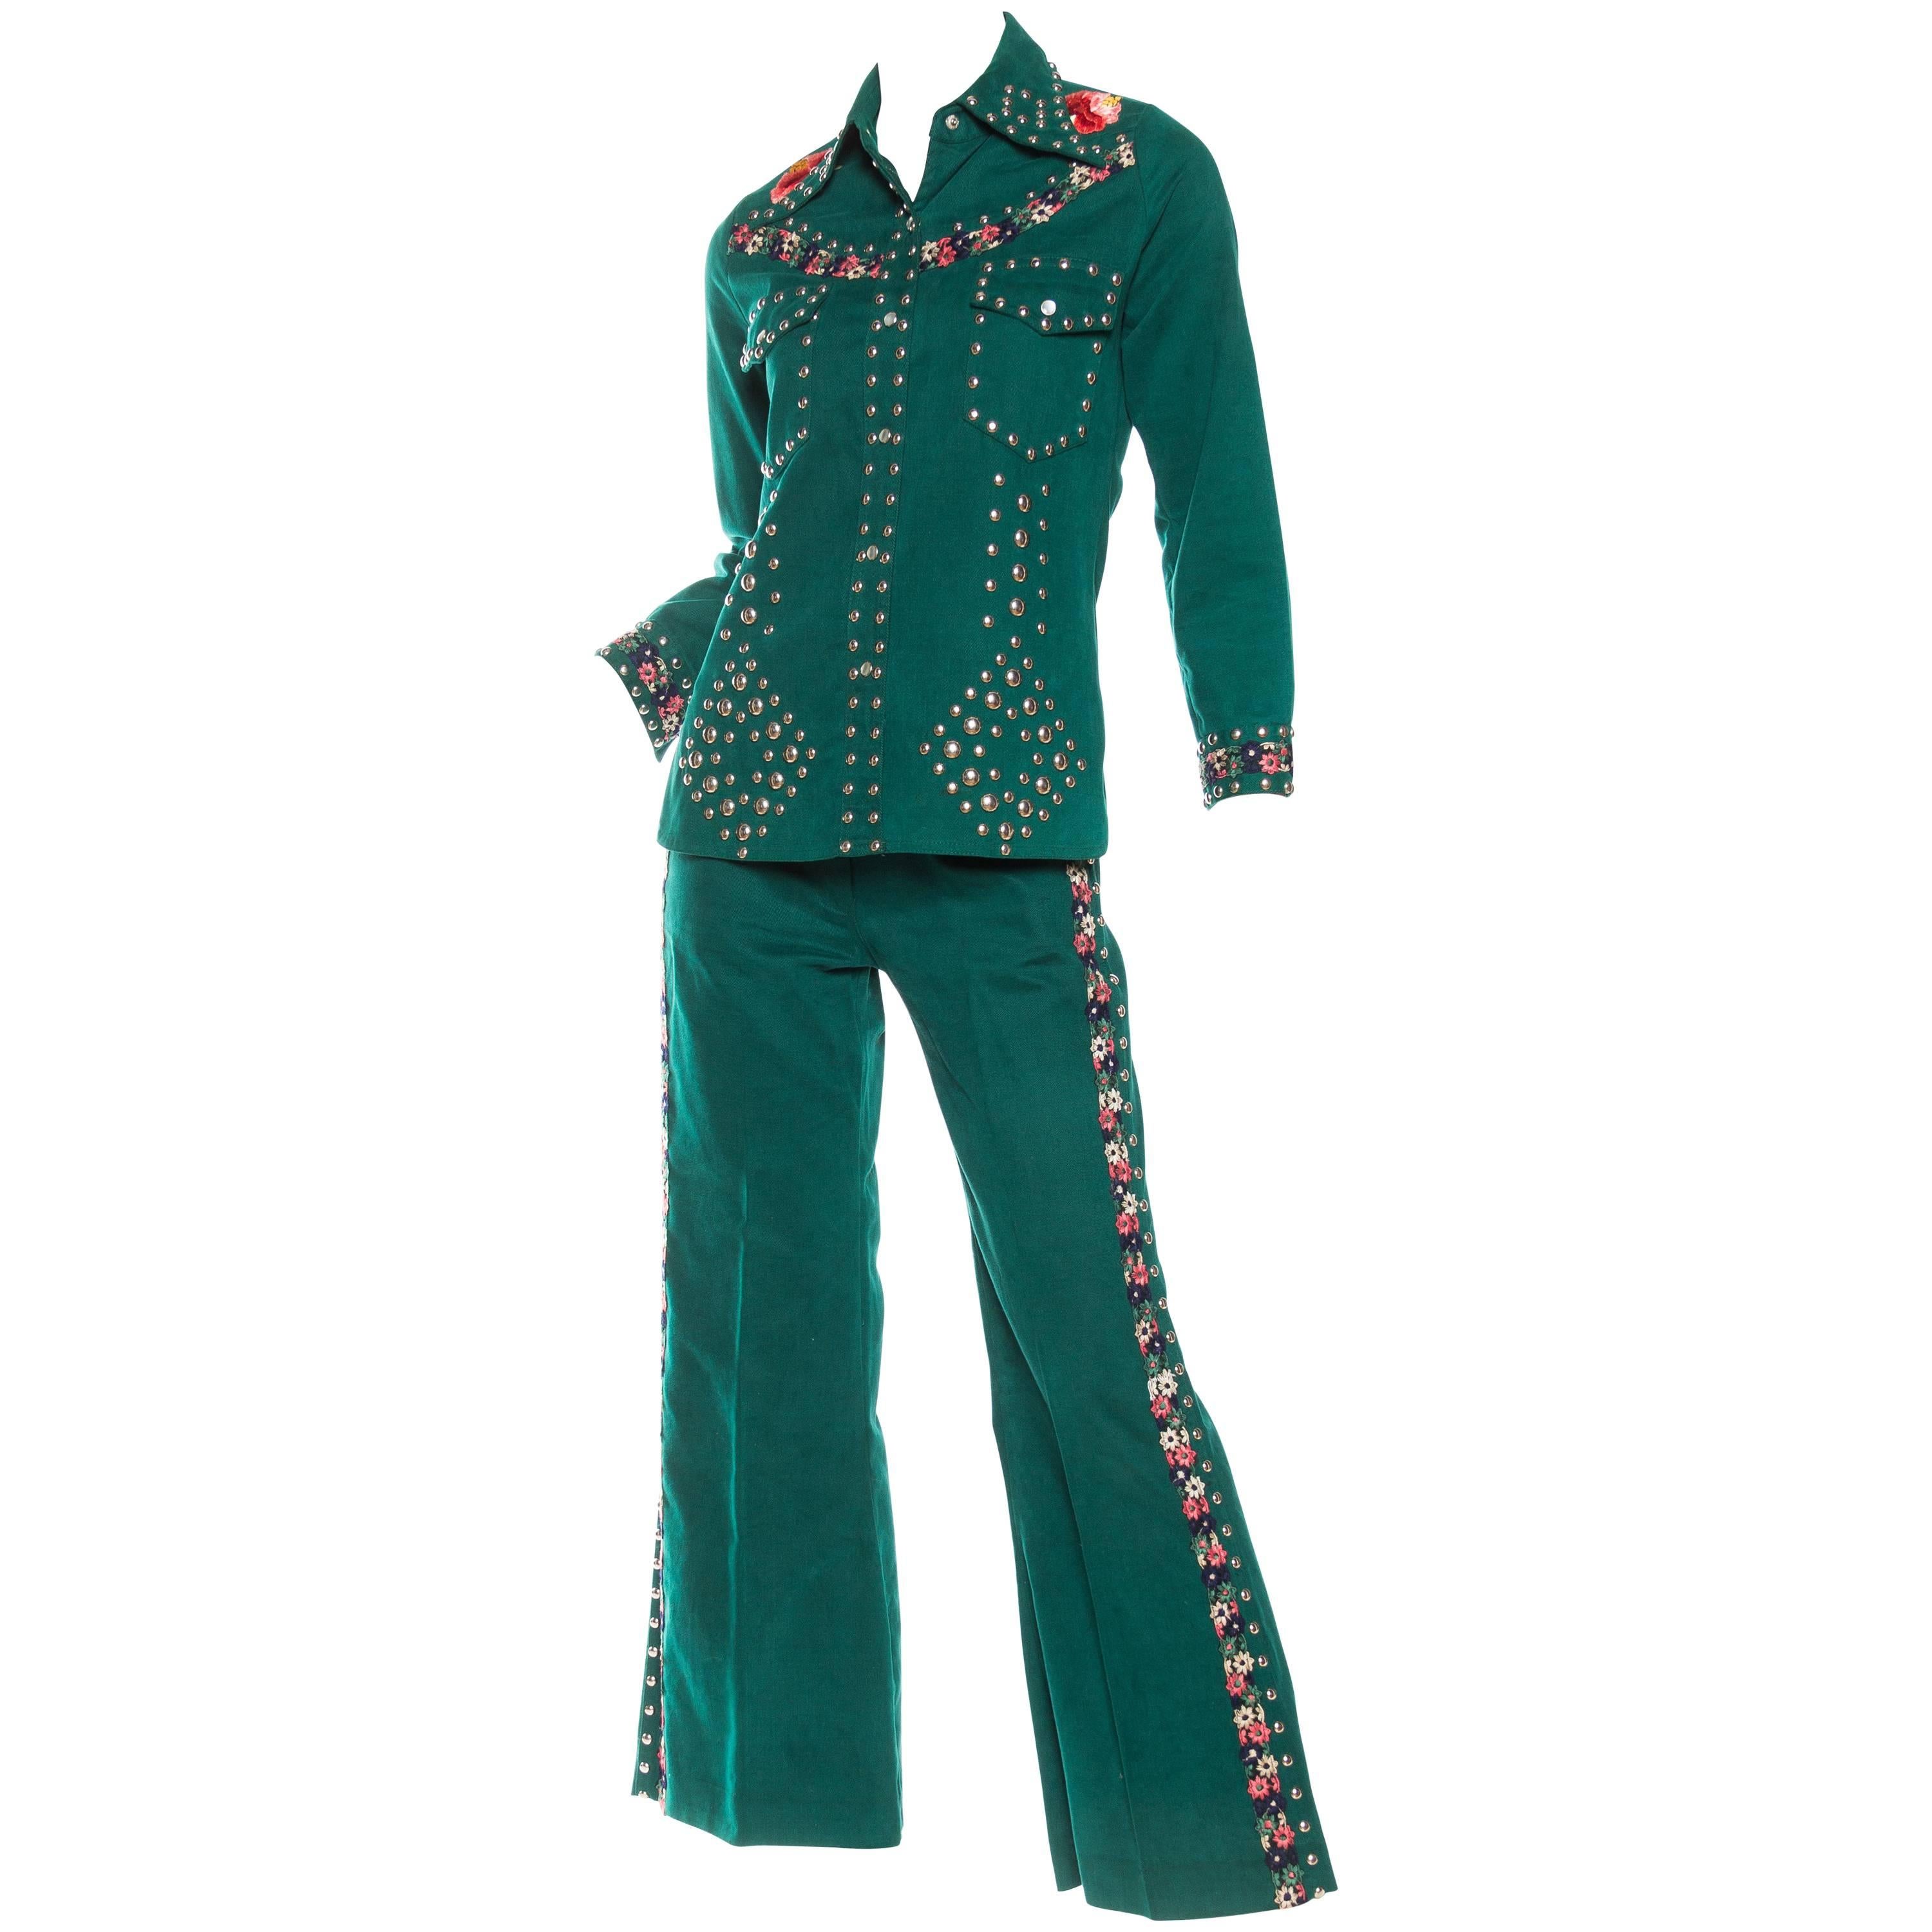 Gucci Style 1970s Studded Denim Suit with Floral Embroidery